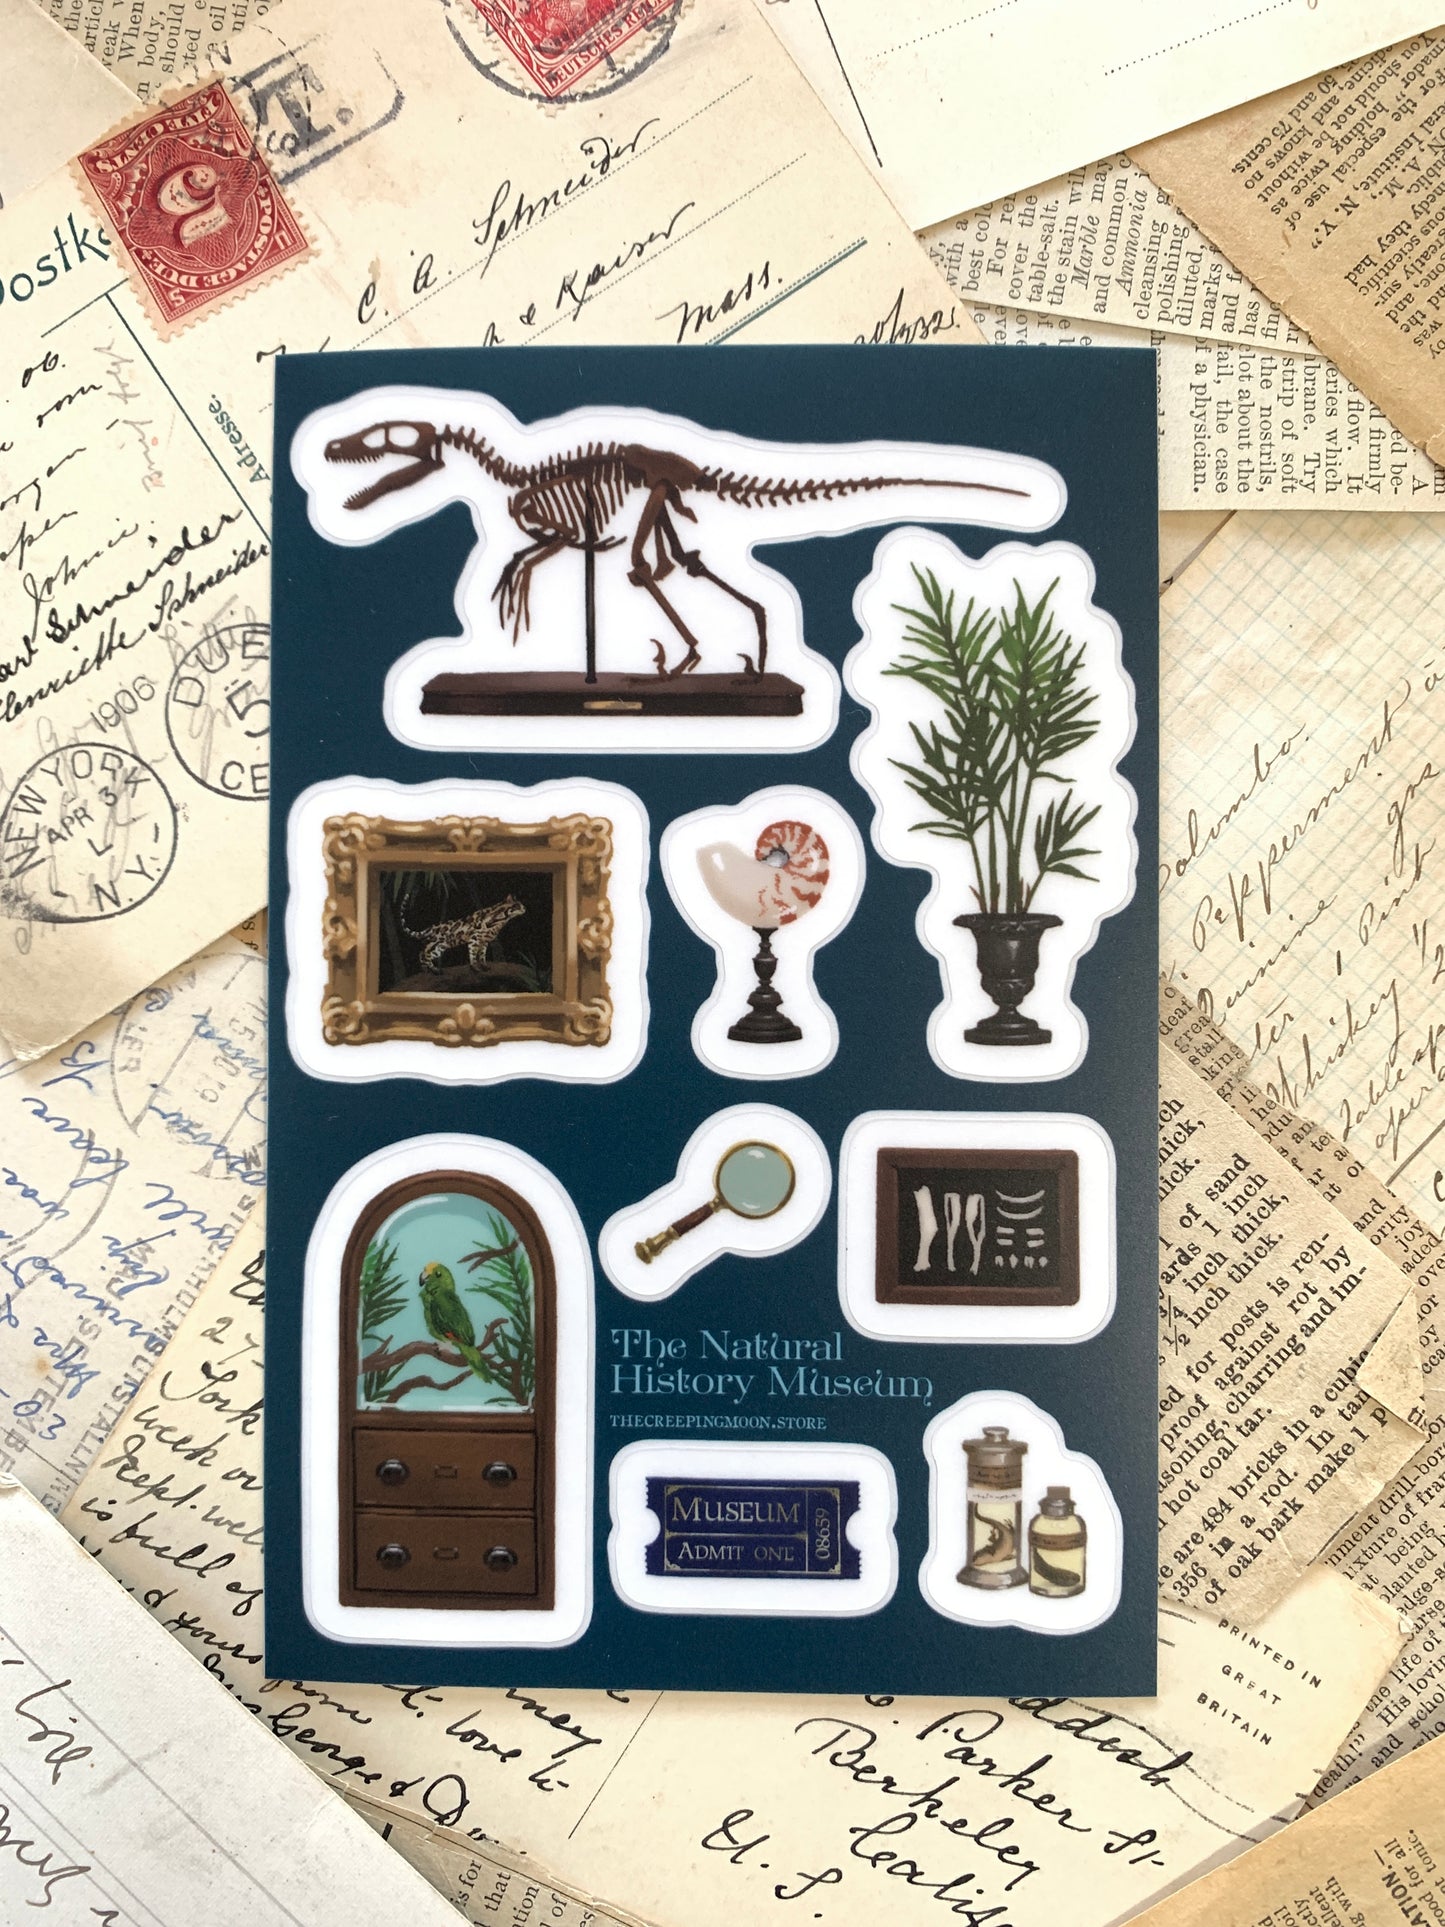 The Natural History Museum clear vinyl sticker sheet